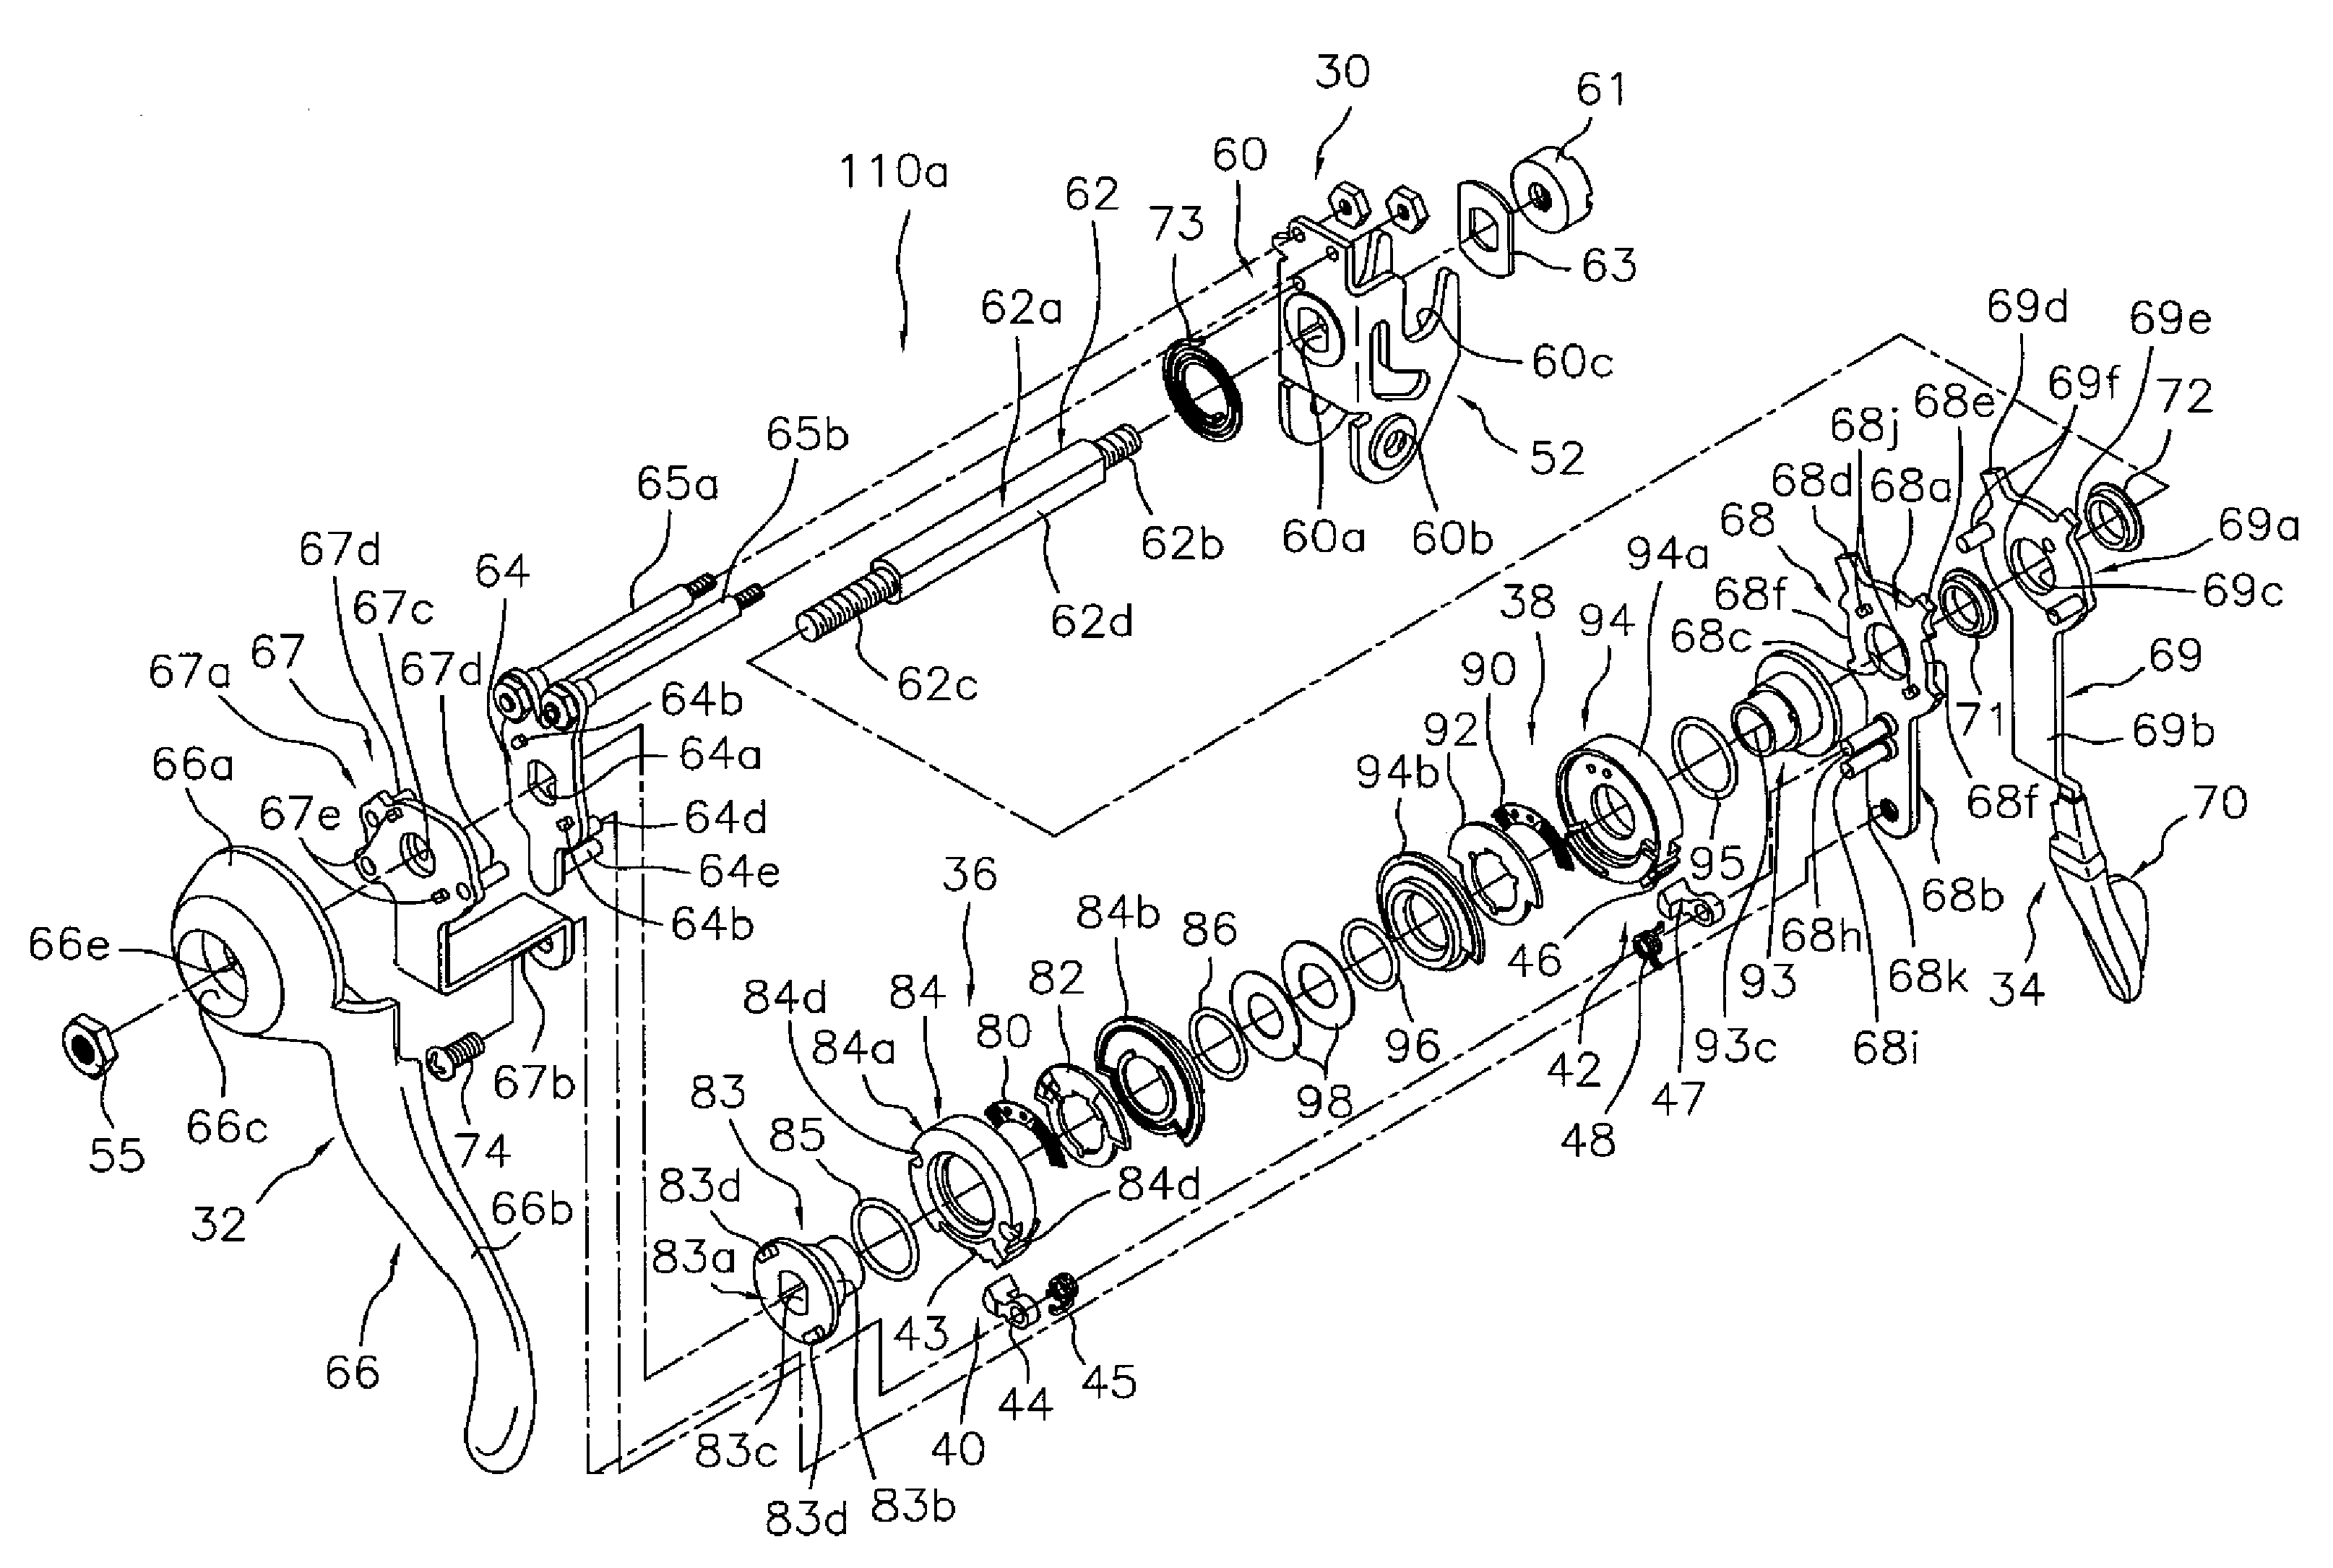 Bicycle shift operating device